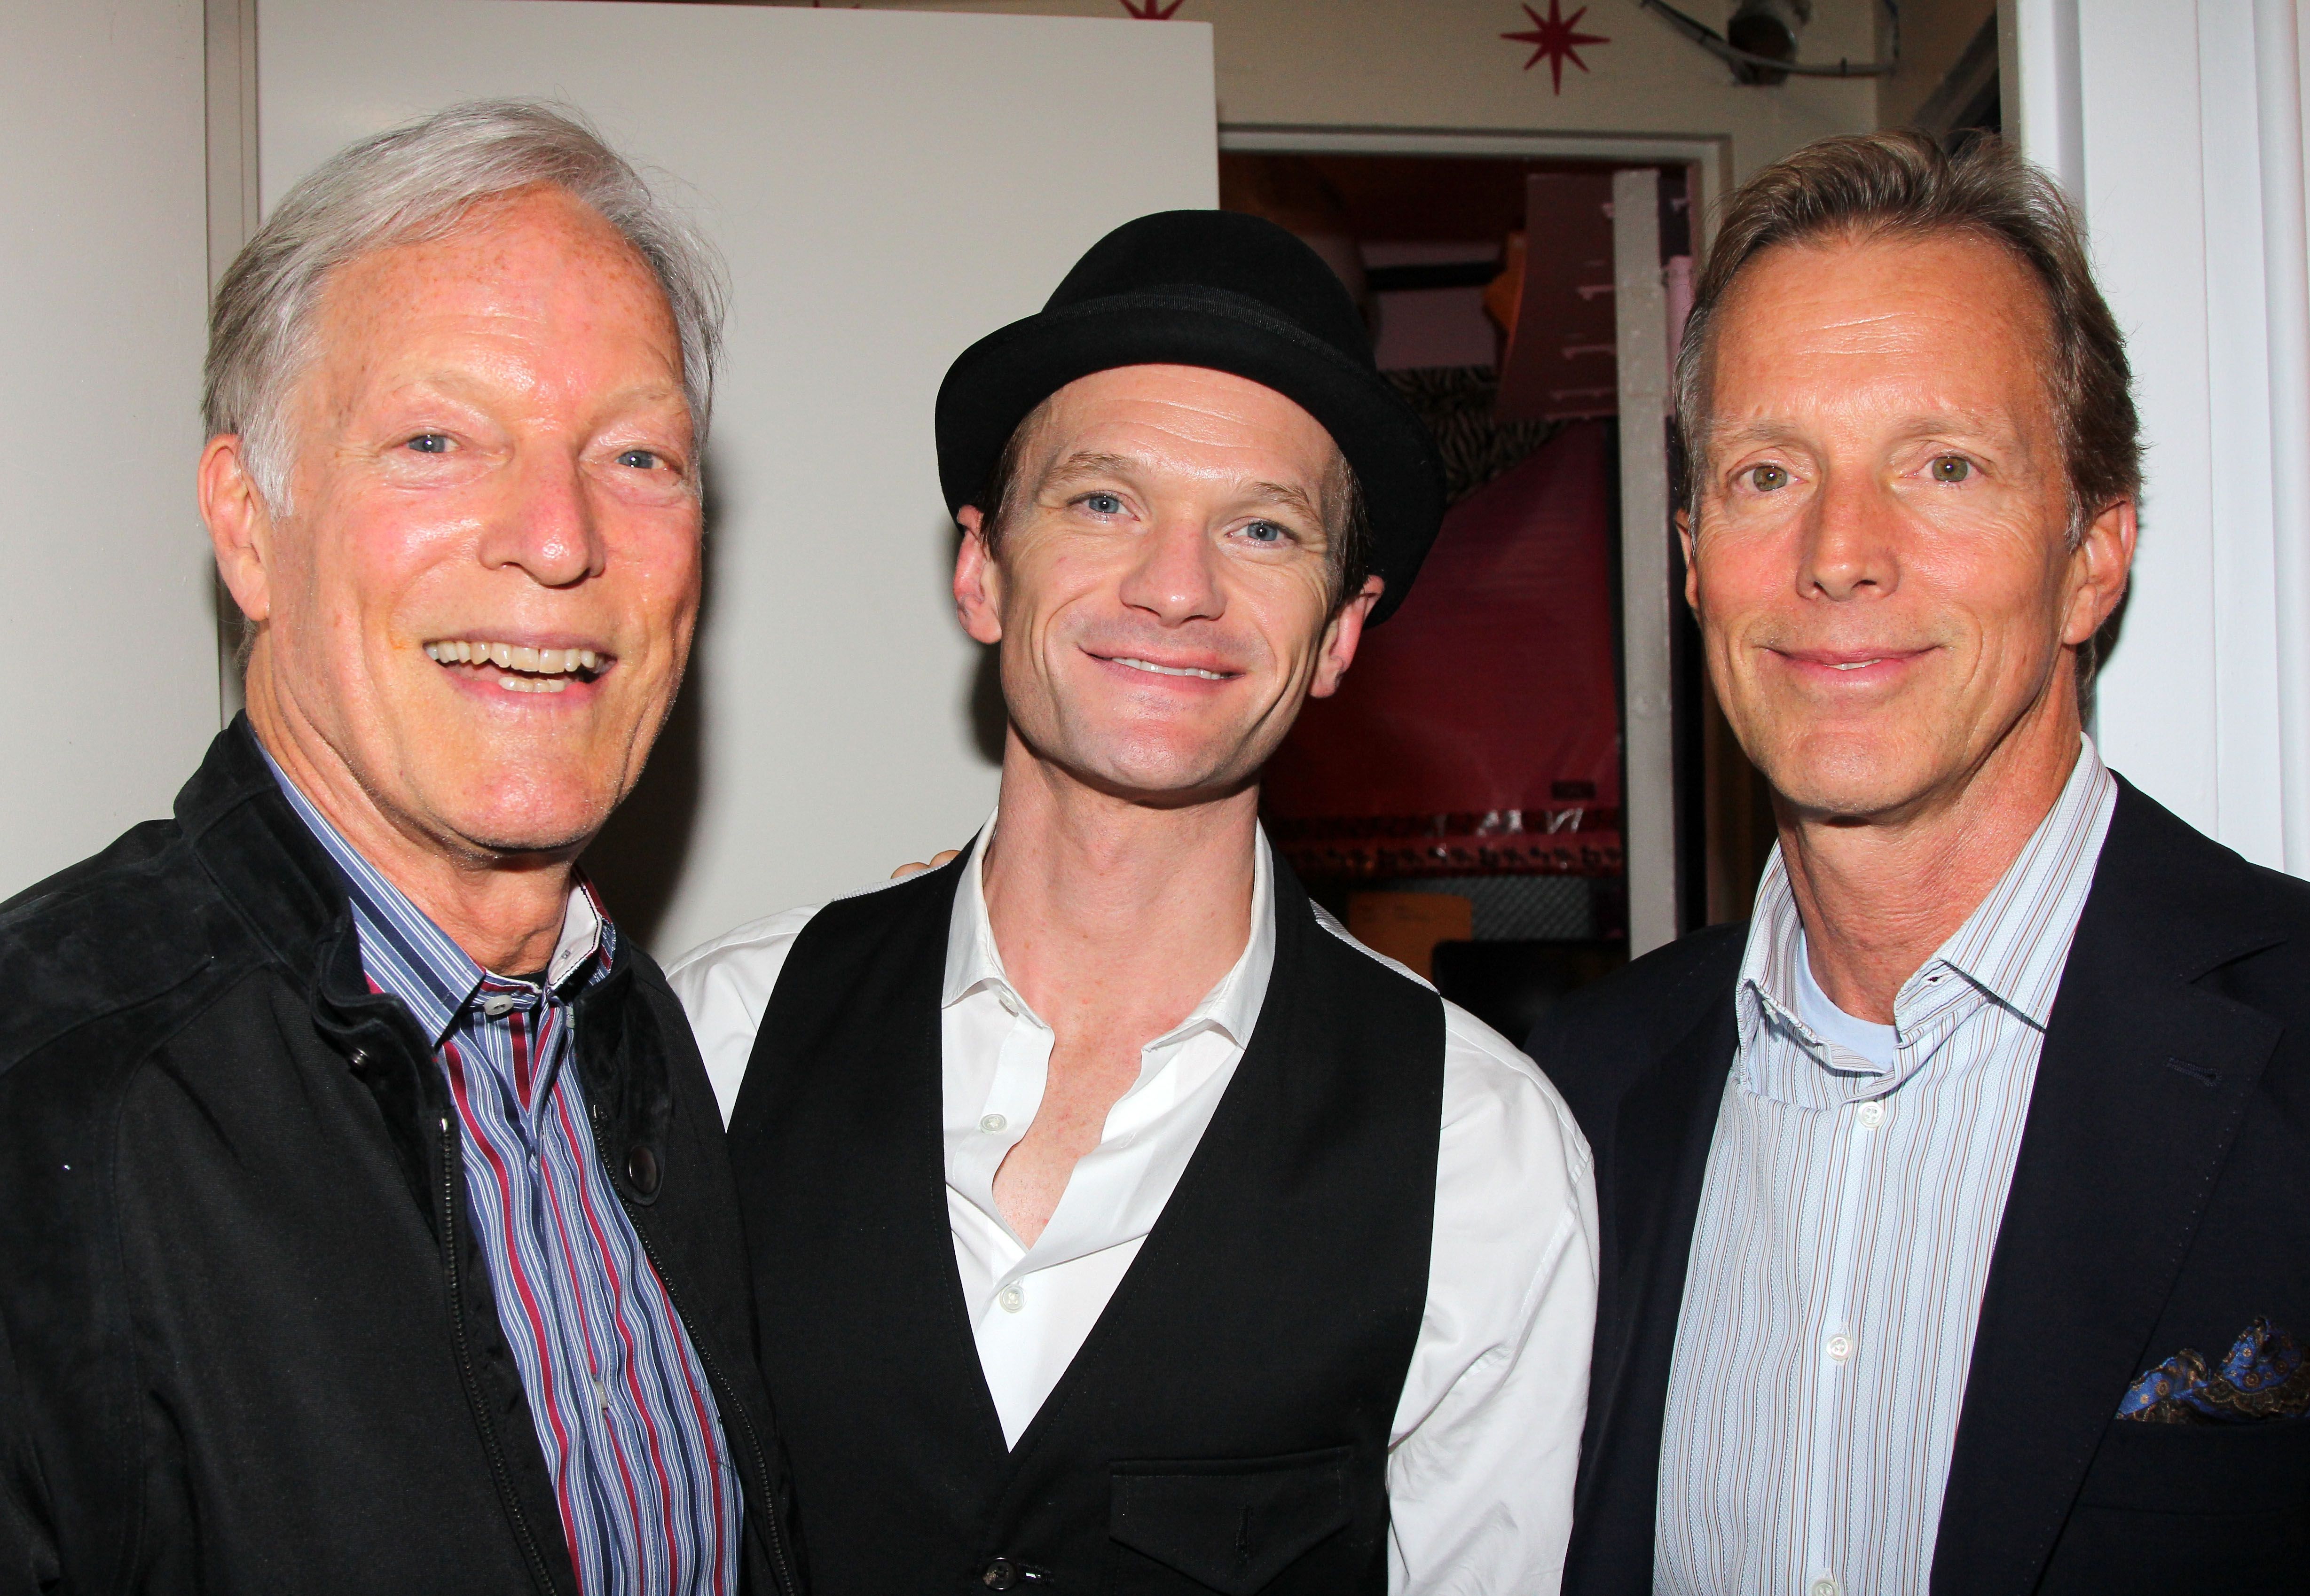 Richard Chamberlain, Neil Patrick Harris, and Martin Rabbett pose backstage at "Hedwig and The Angry Inch" on Broadway on May 27, 2014, in New York City. | Source: Getty Images